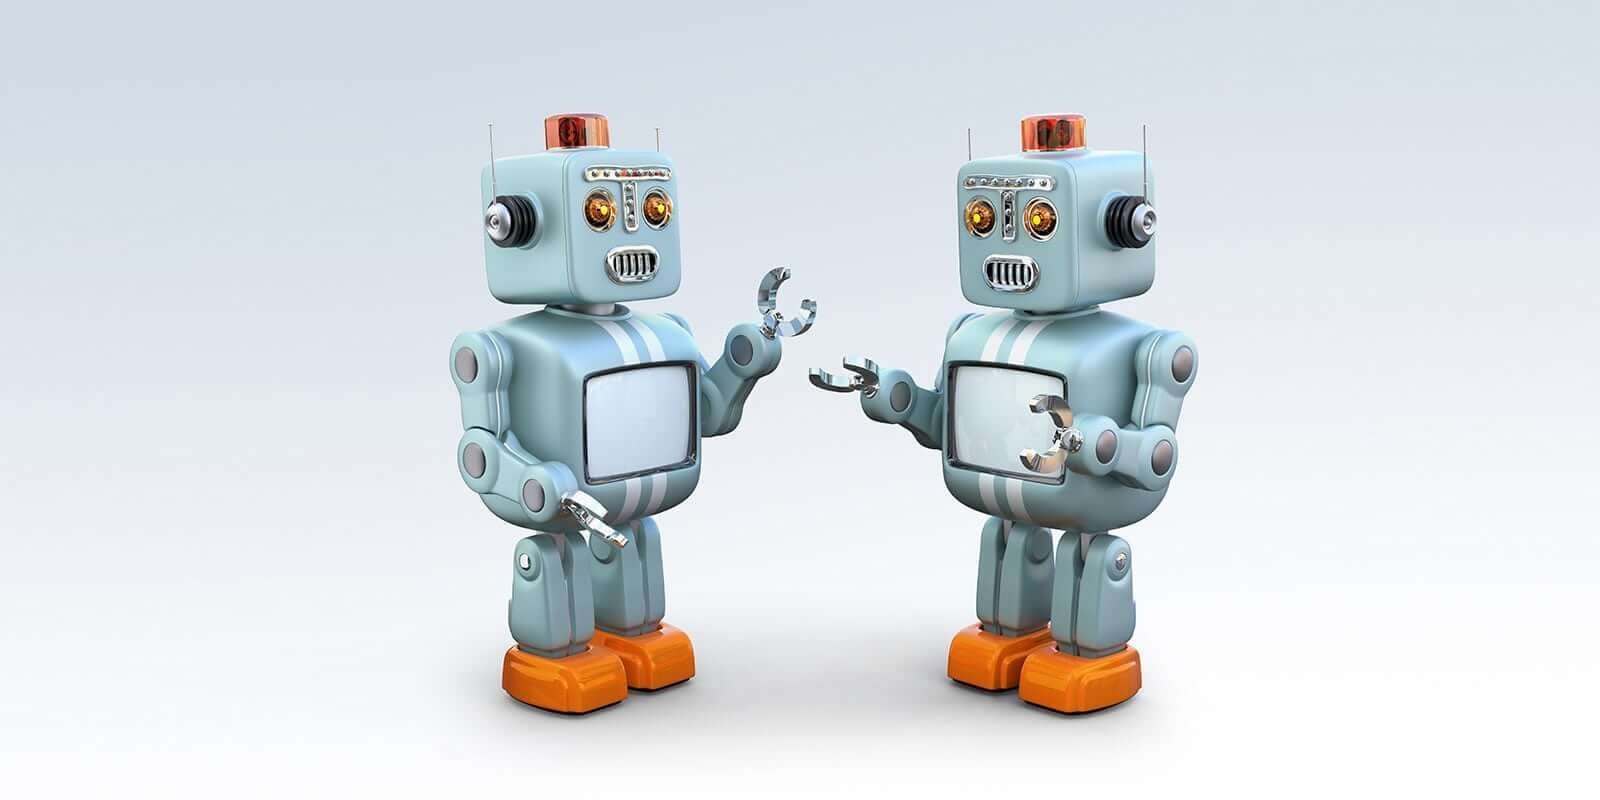 5 Ways Bad Bots Can Take Over The Internet